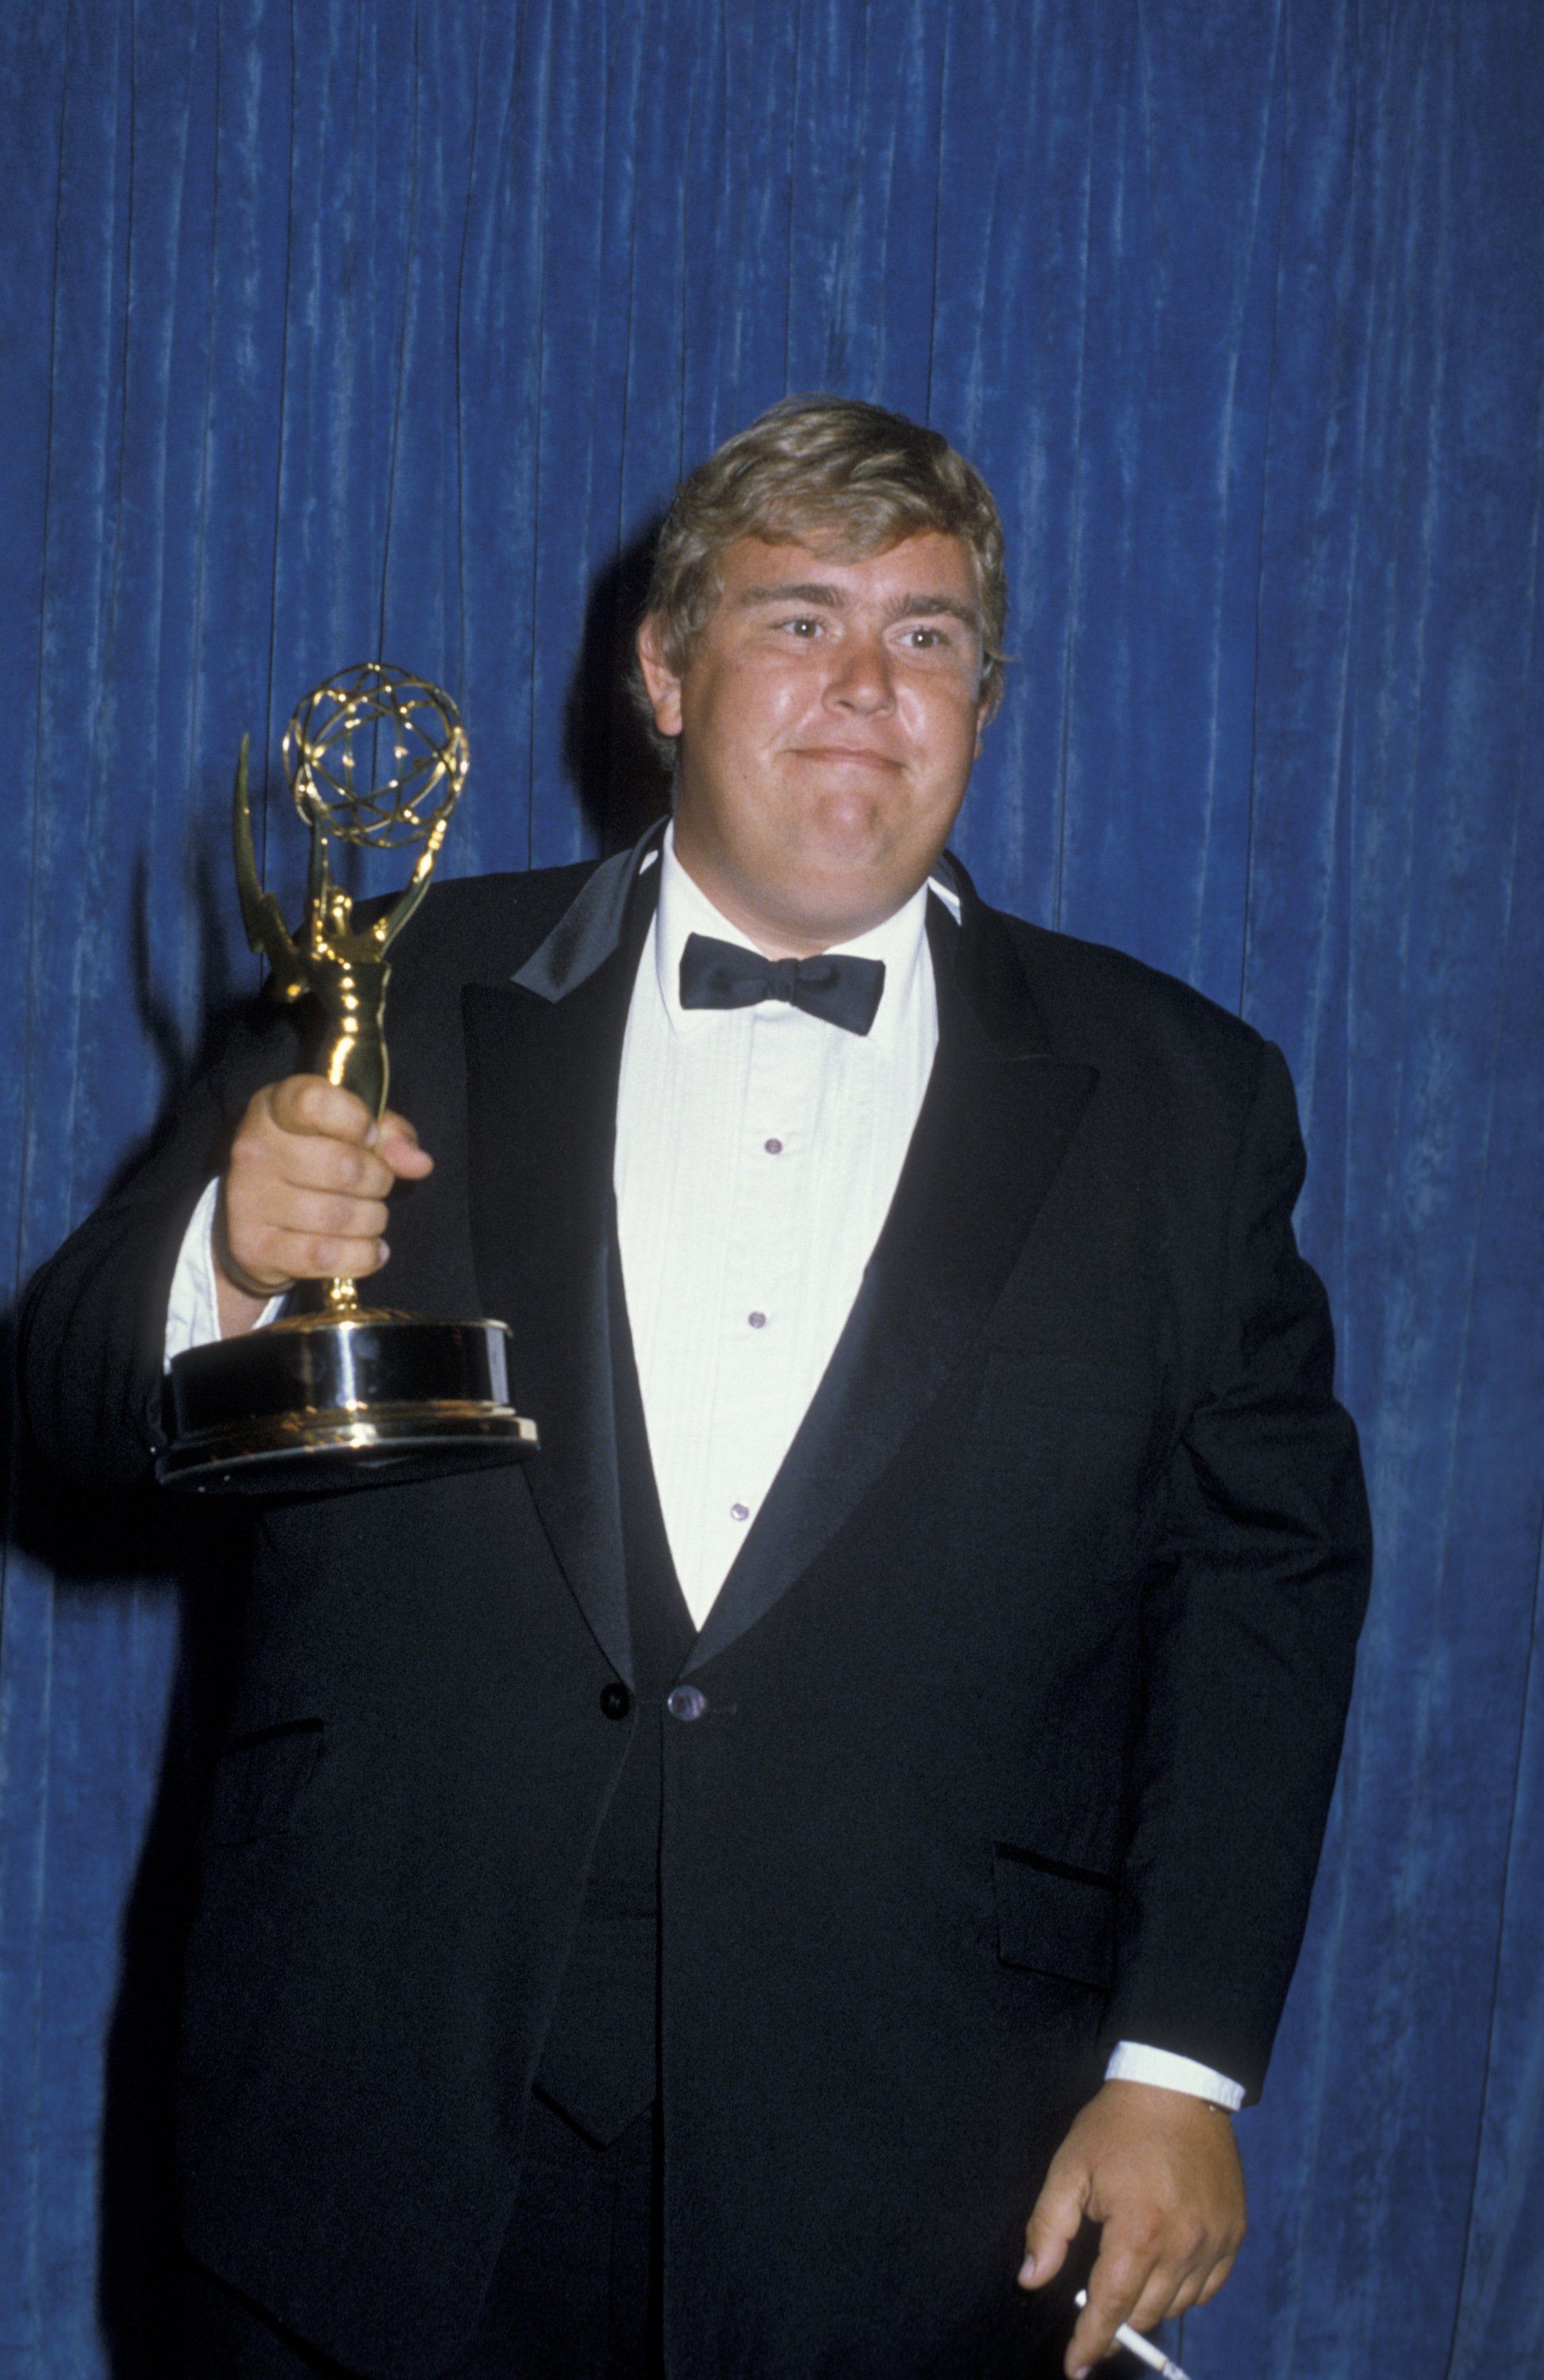 John Candy attends 35th Annual Primetime Emmy Awards on September 25, 1983 at the Pasadena Civic Auditorium in Pasadena, California | Photo: Getty Images